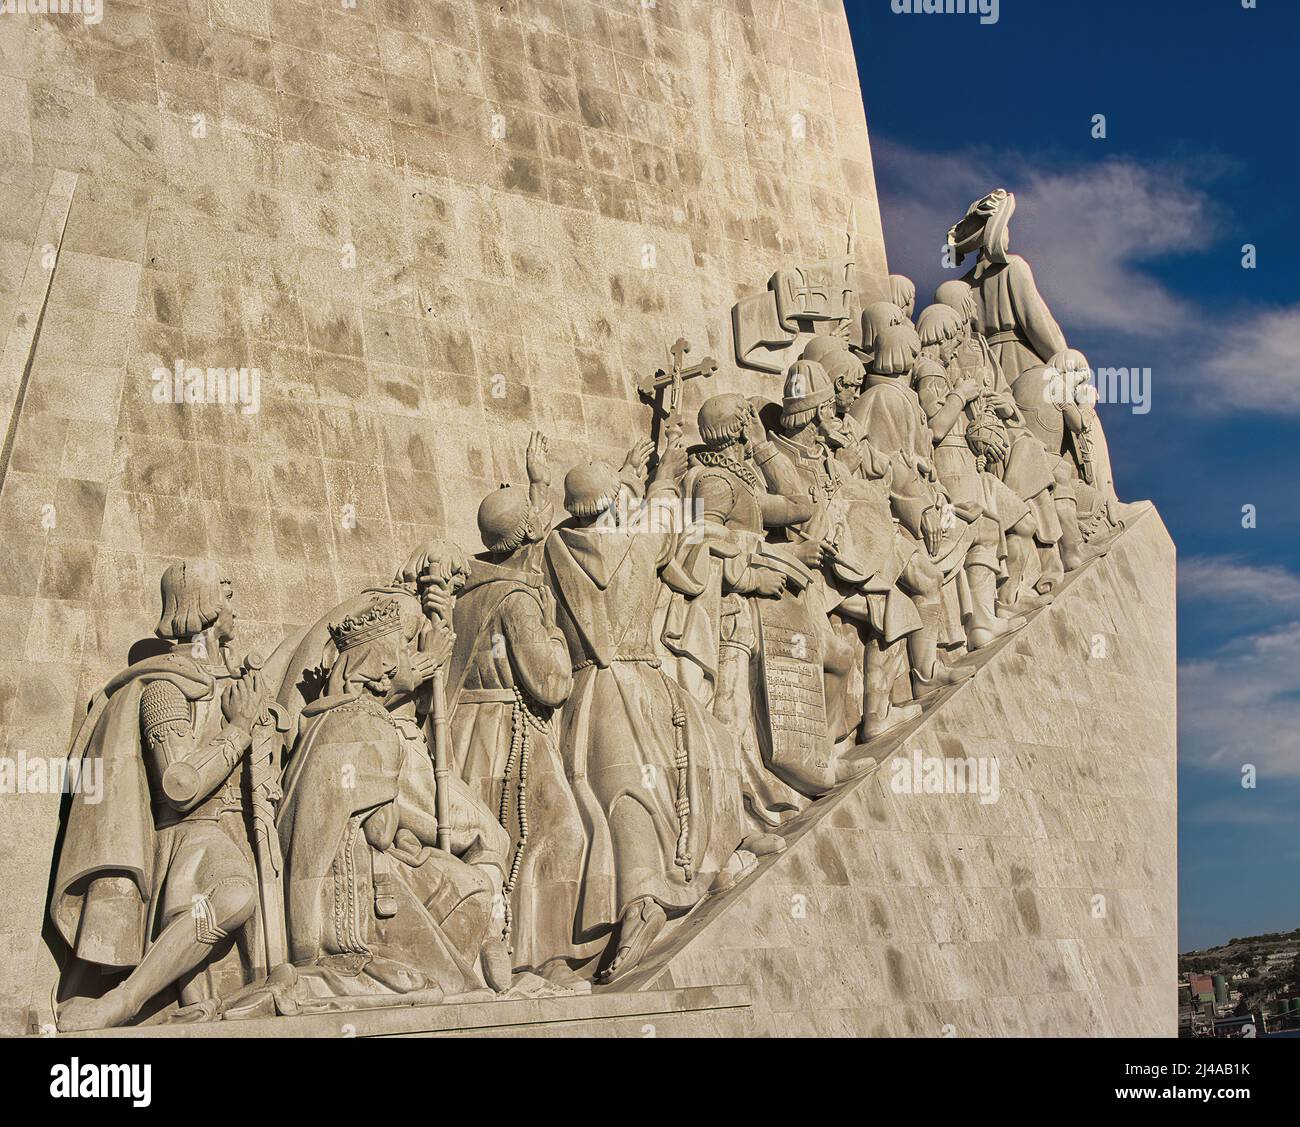 Padrão dos Descobrimentos, (Monument of the Discoveries) the monument celebrates the Portuguese Age of Discovery during the 15th and 16th centuries. Stock Photo